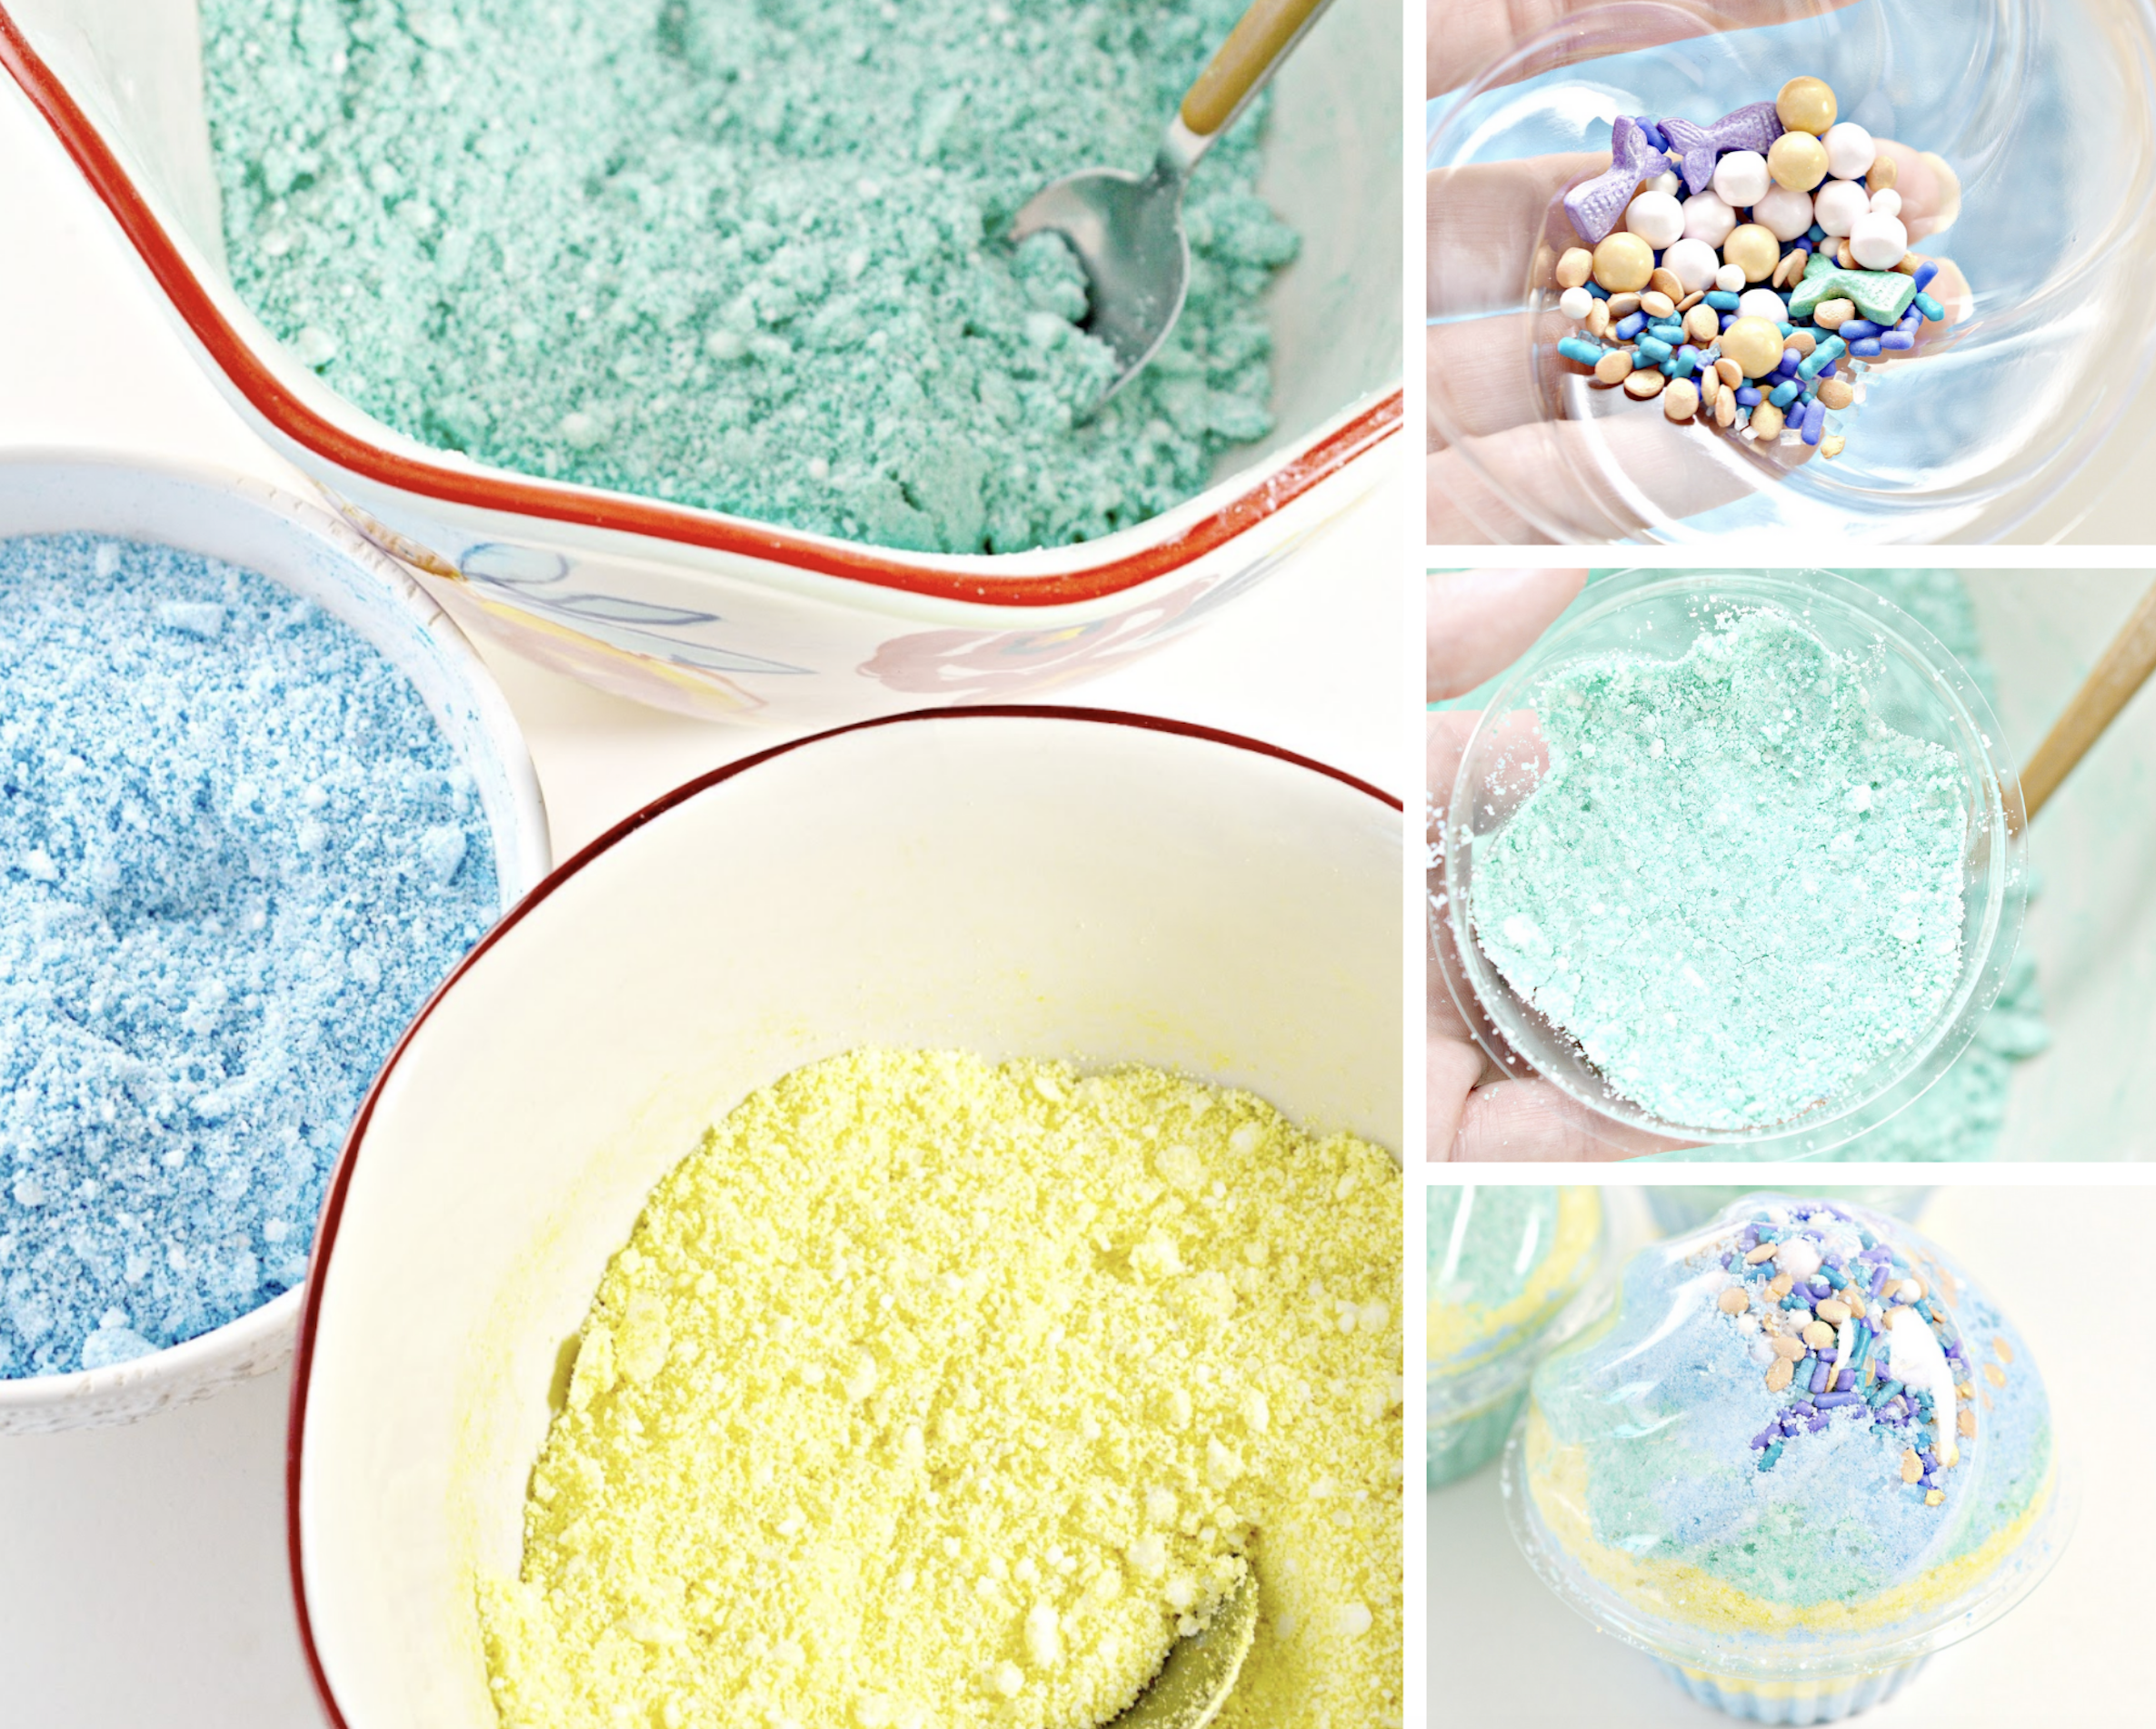 Make your next bath smell wonderful, fizzy and more relaxing with DIY bath bombs! Try my recipe for Mermaid Cupcake Bath Bombs DIY! #bathbombs #DIY #bathcare #selfcare #DIYbathbombs #homemade #homemadebathbombs #beauty #beautyrecipes #skincarerecipes #imadethis #beautybloggers #beautyinfluencer #crafty #craftymoms